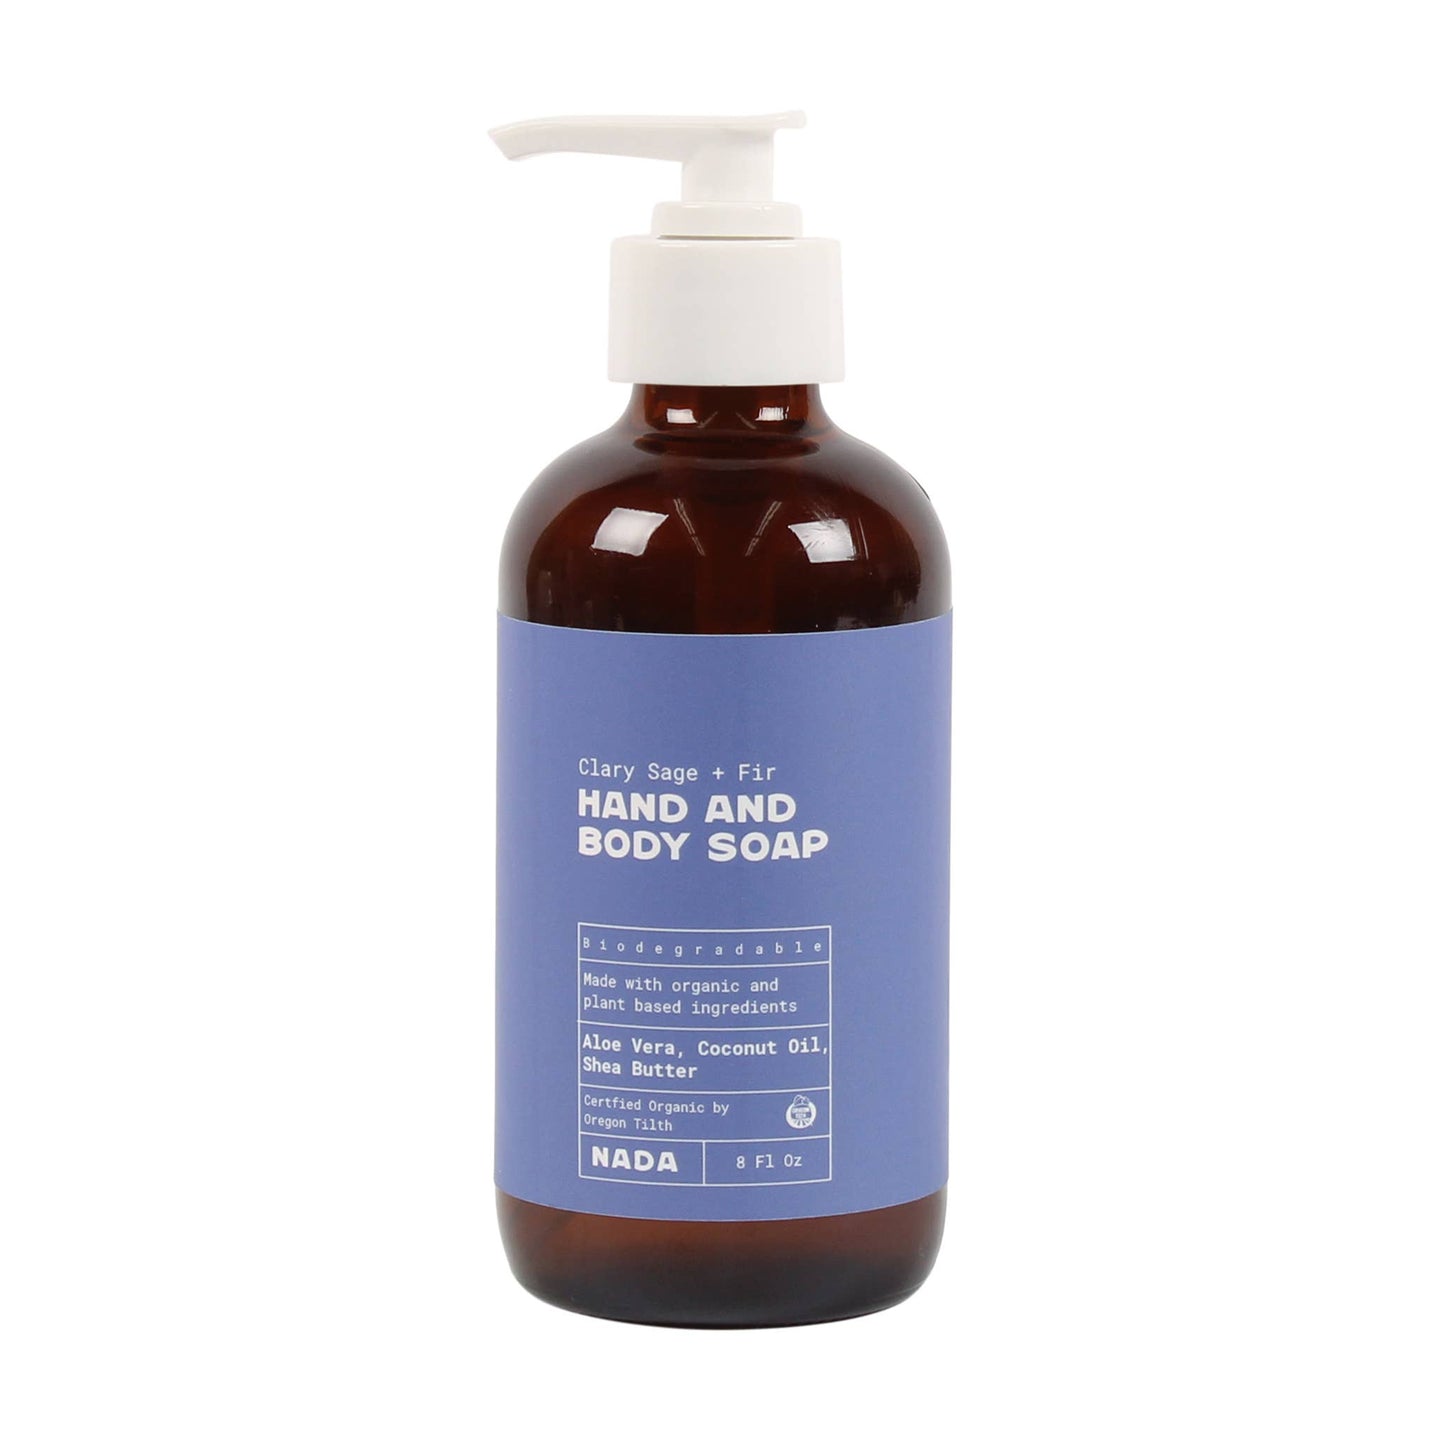 The Nada Shop - Organic Hand and Body Soap Clary Sage + Fir